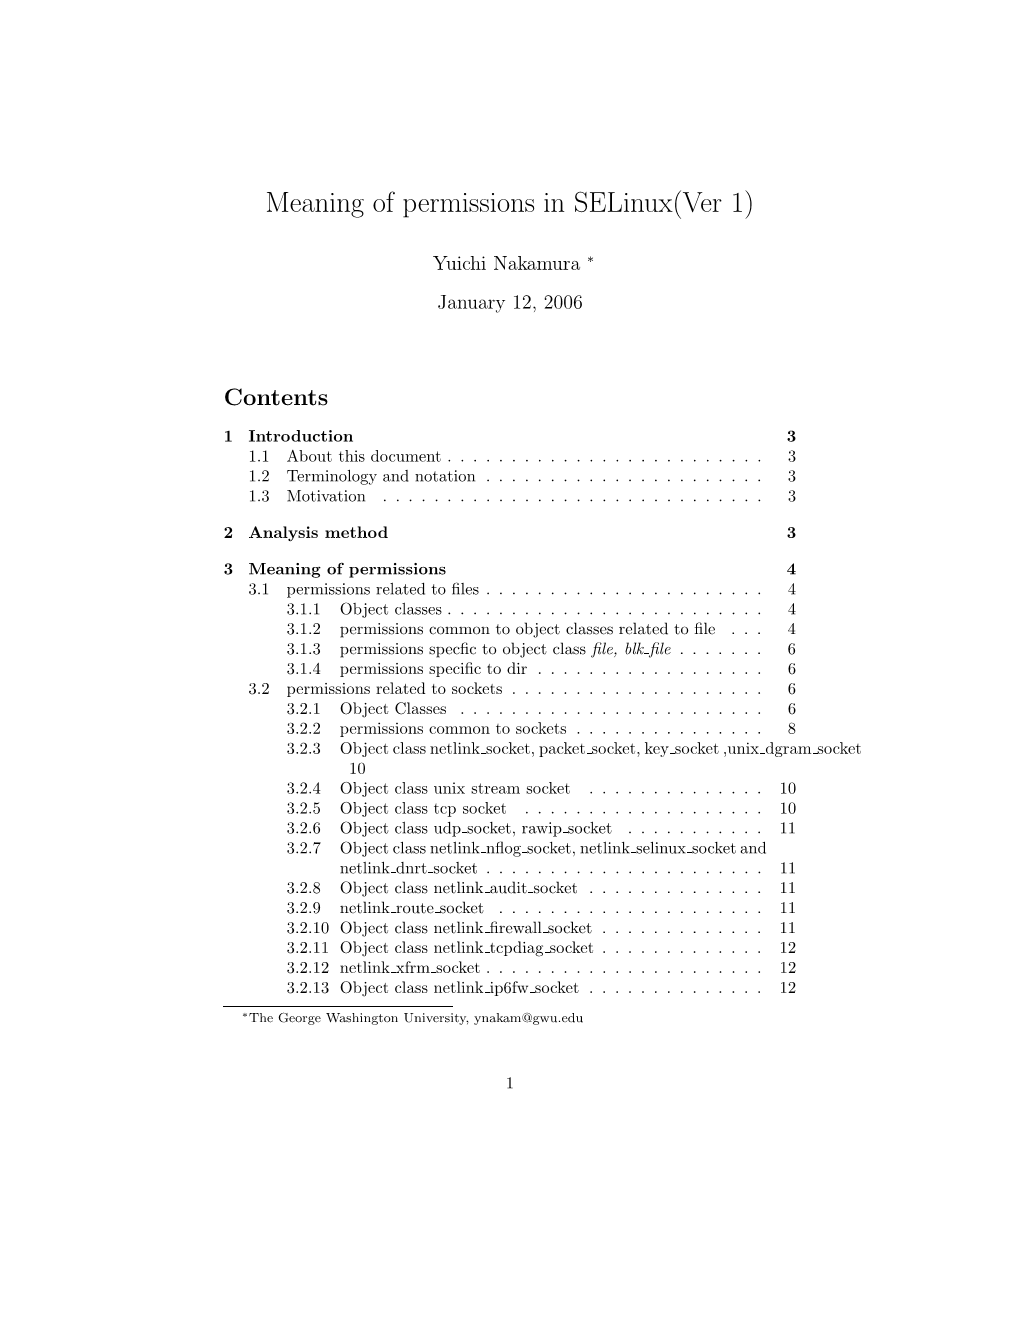 Meaning of Permissions in Selinux(Ver 1)